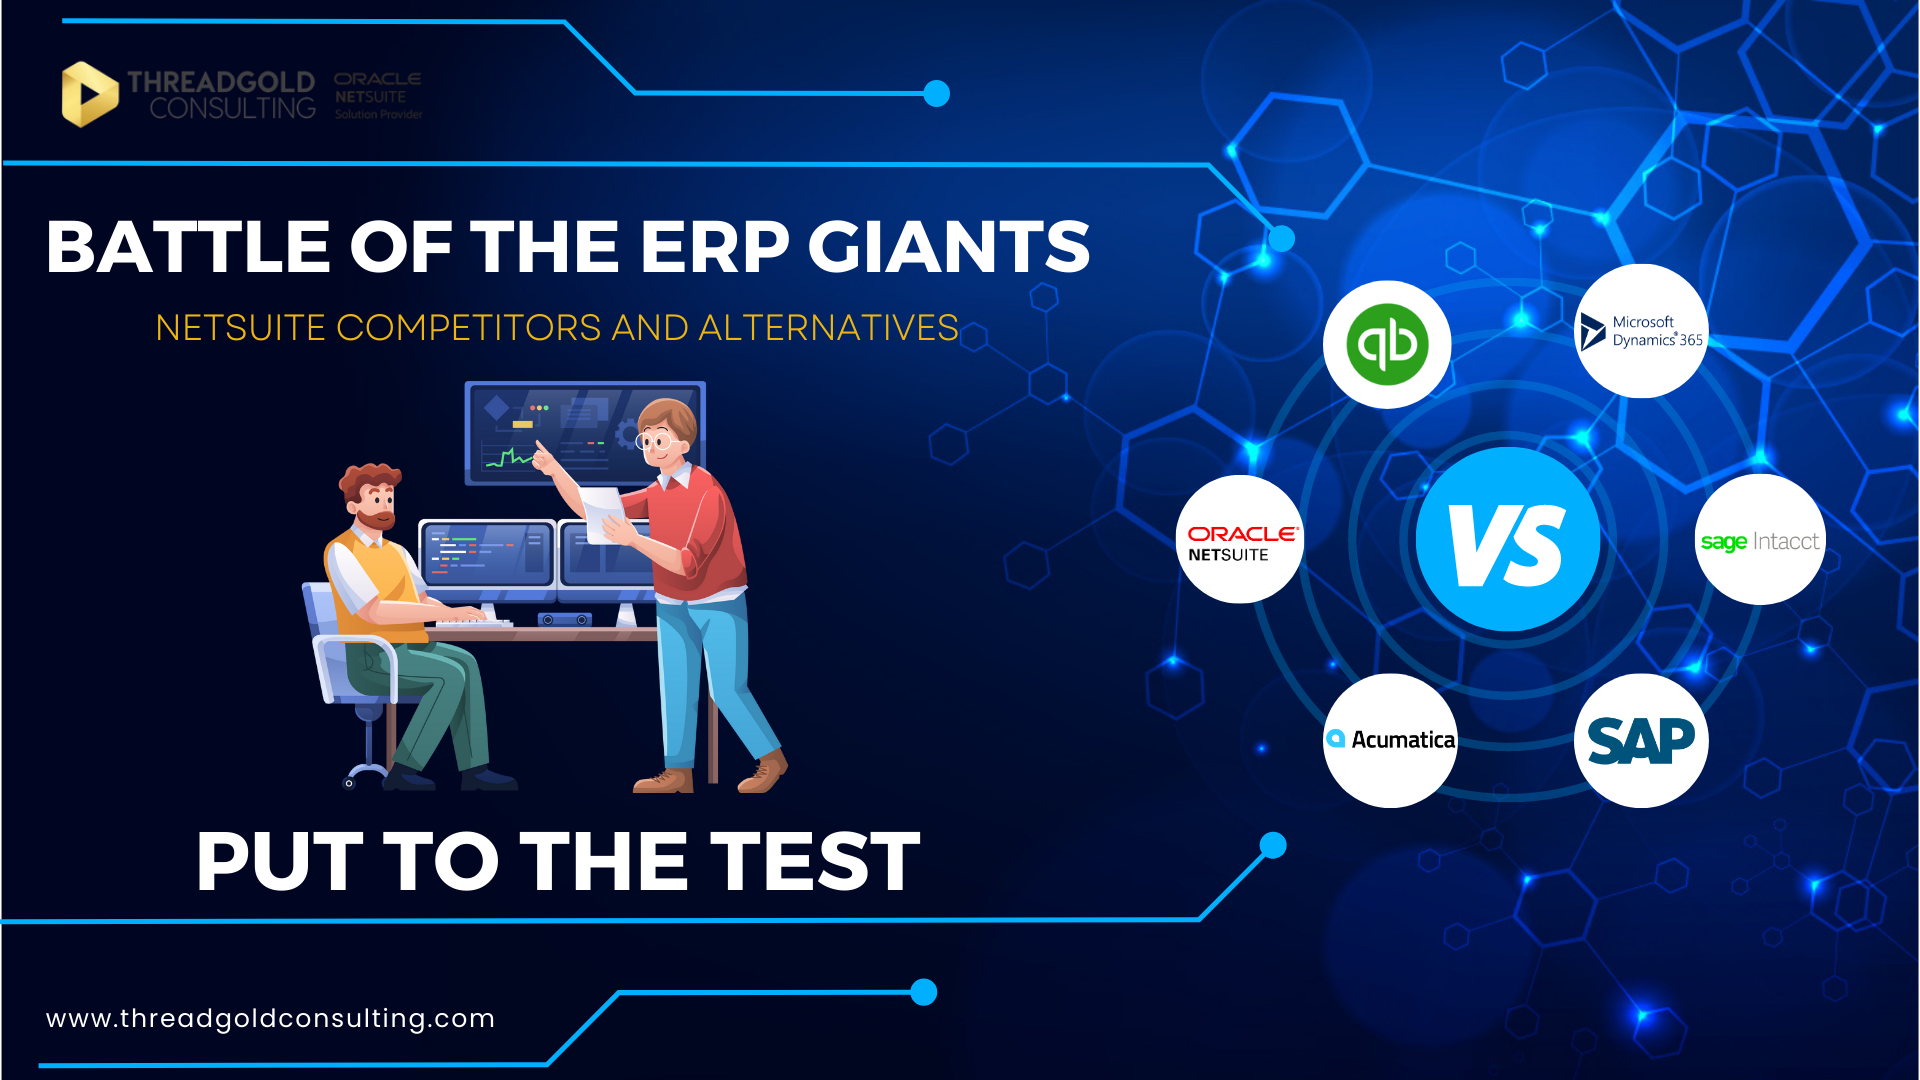 Battle of the ERP Giants: NetSuite Competitors and Alternatives Put to the Test